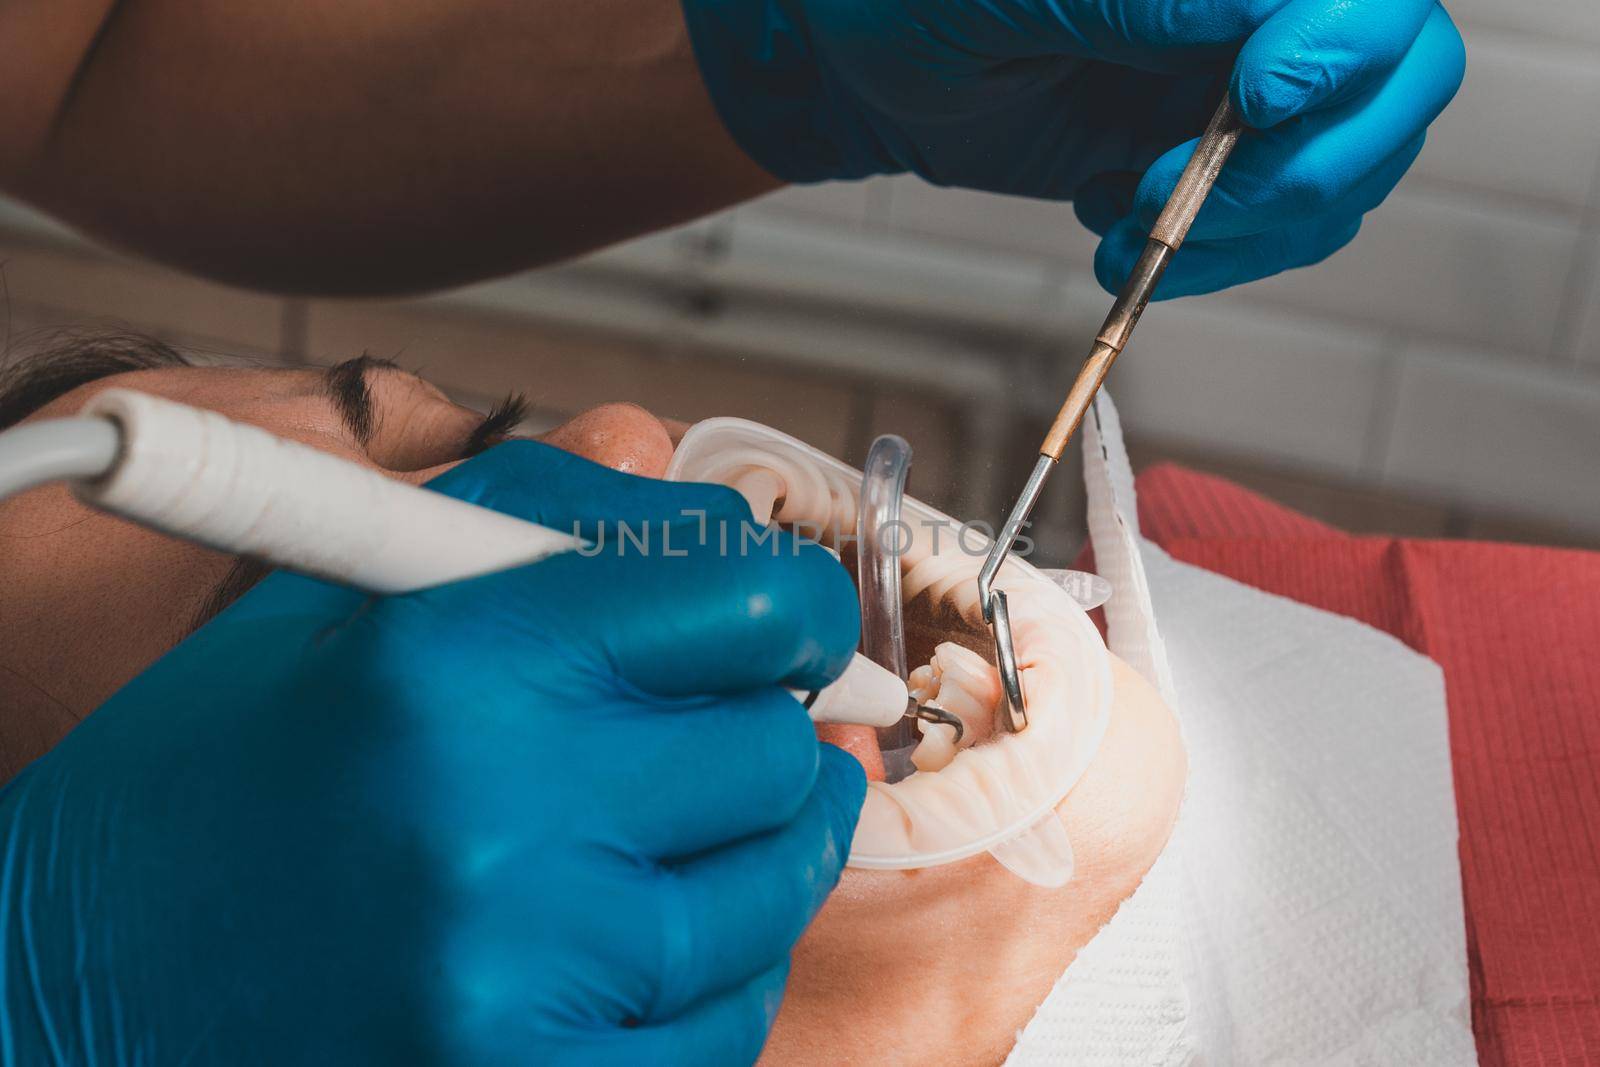 The dentist removes tartar using ultrasound, the patient at the dentist. Retractor for isolation of lips and gums. 2020